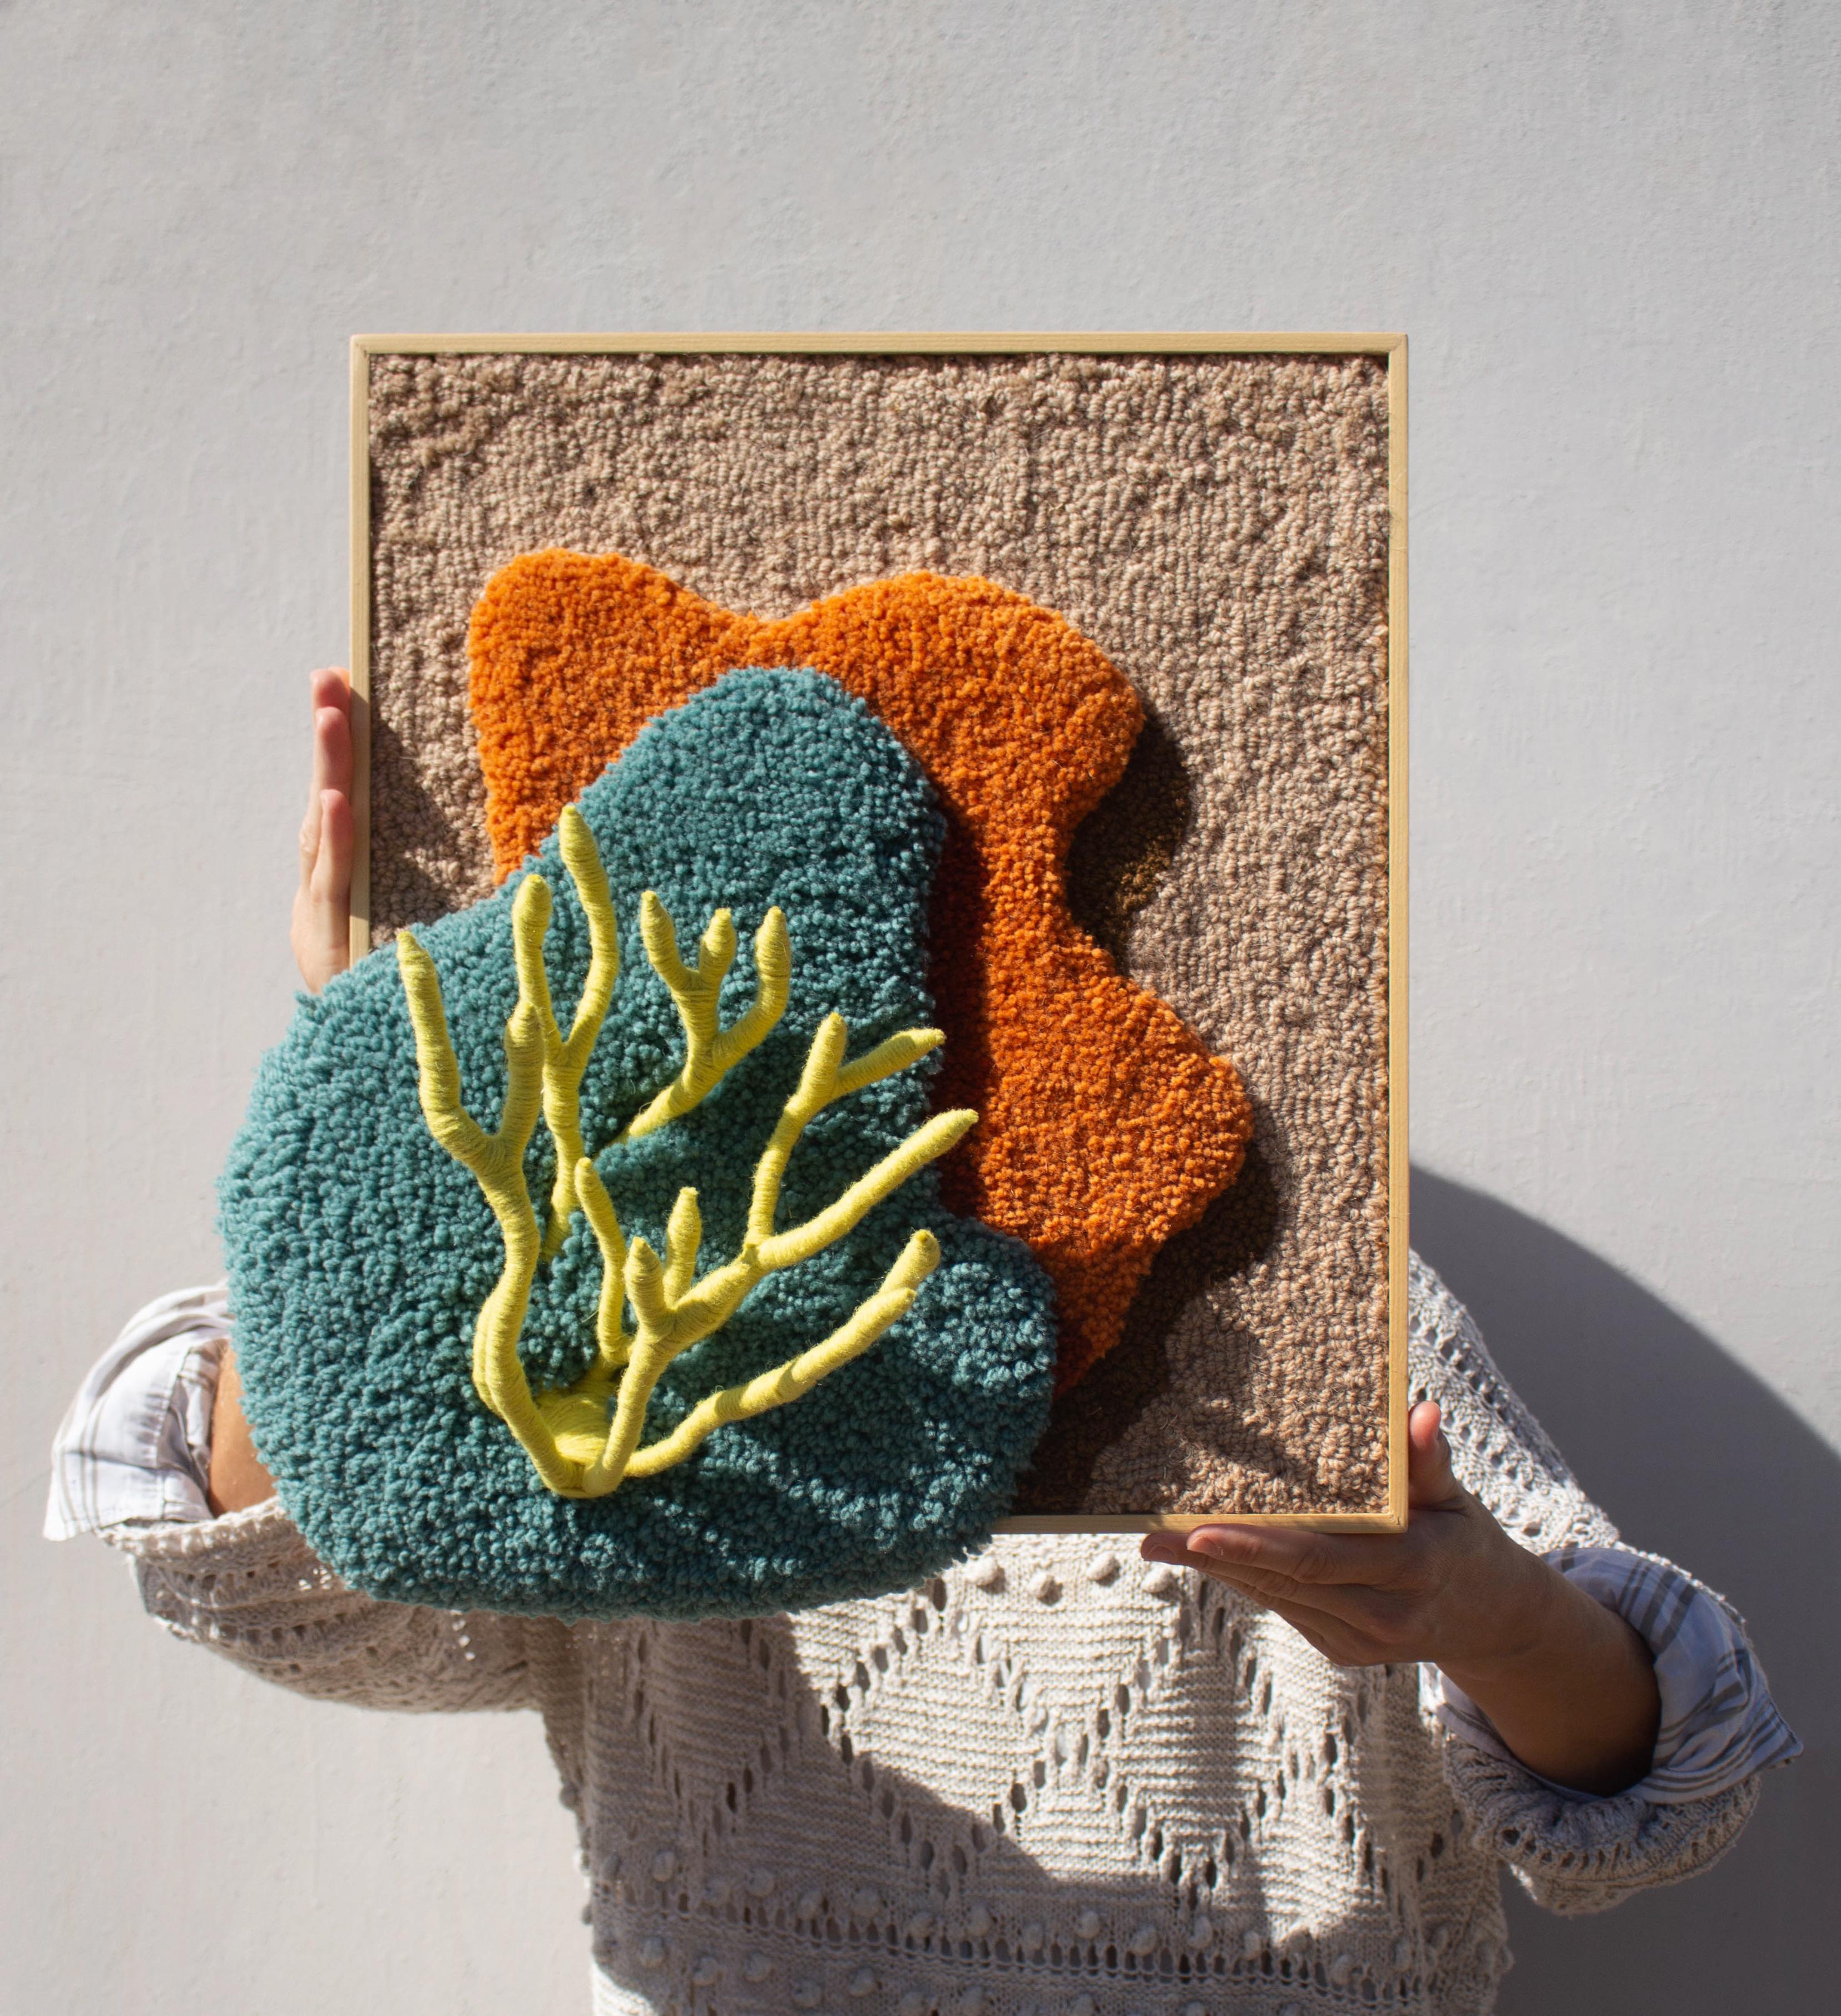 Anthozoa Lima Tapestry is handmade with 100% Portuguese wool yarn, using tufting gun, carving and textile sculpture techniques. It has a 3D sculpture element and the pine frame, as part of the composition, is designed and produced by the studio.